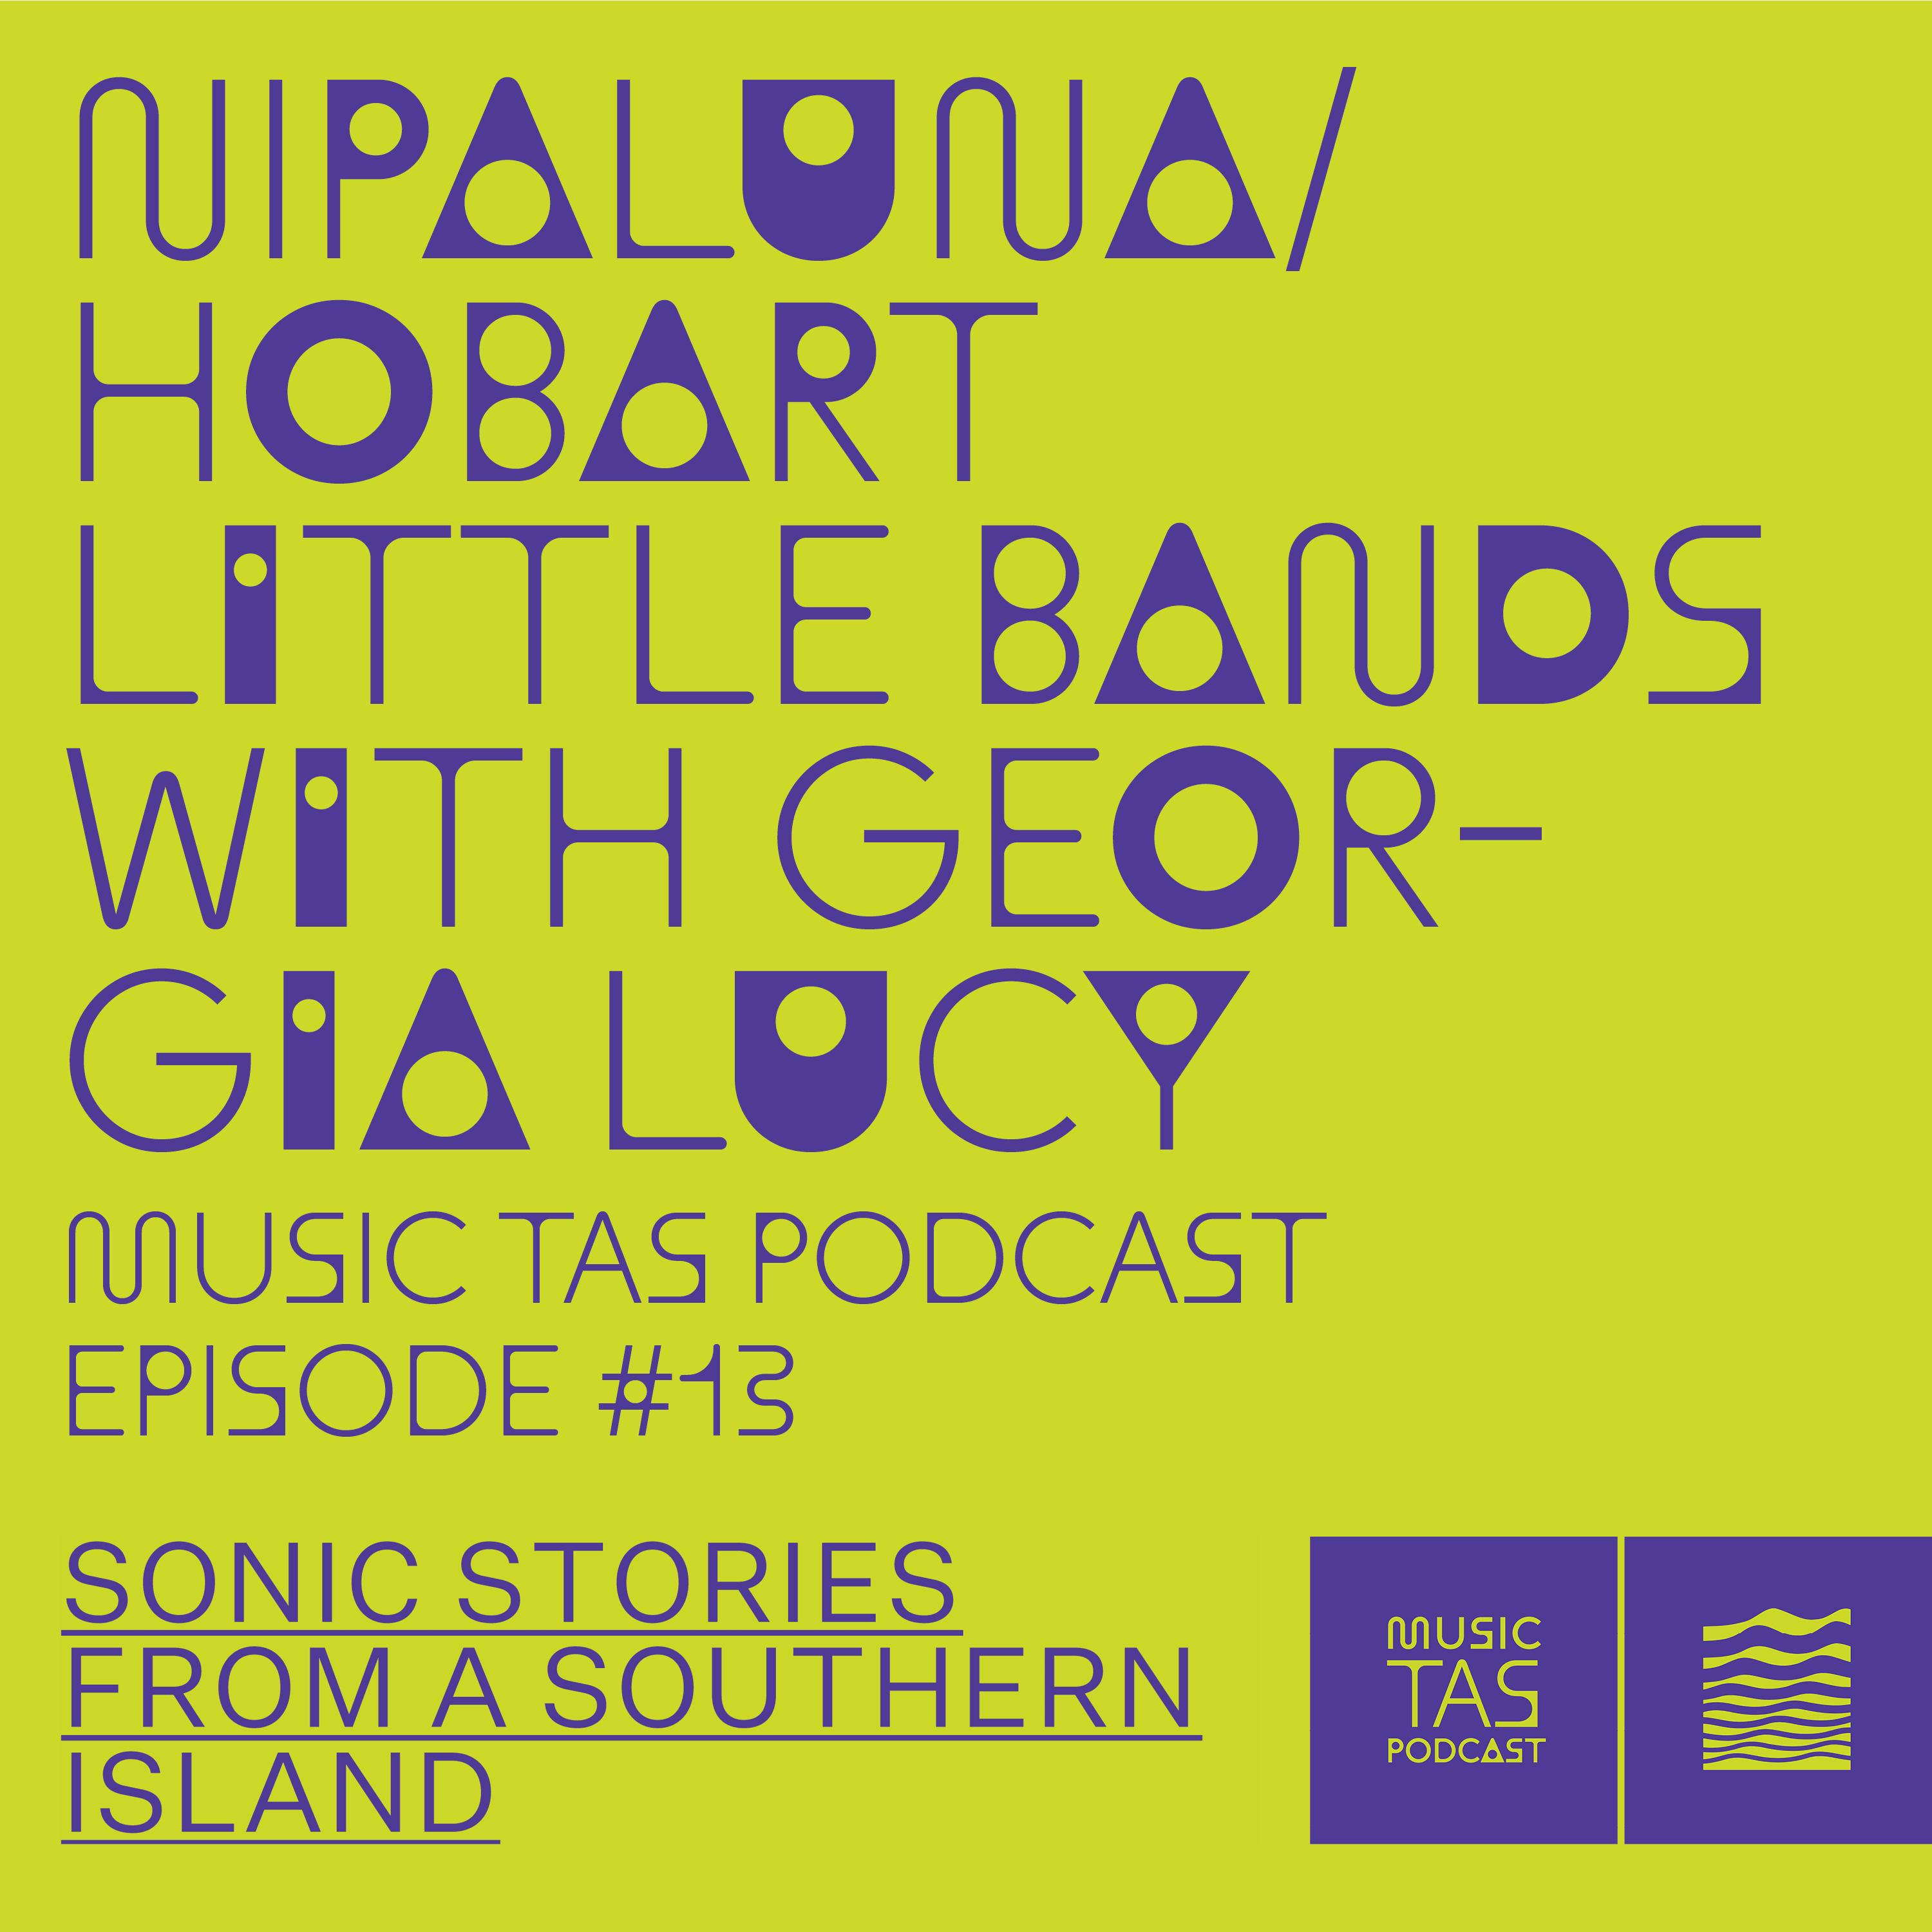 Nipaluna/Hobart little bands with Georgia Lucy purple text on lime background